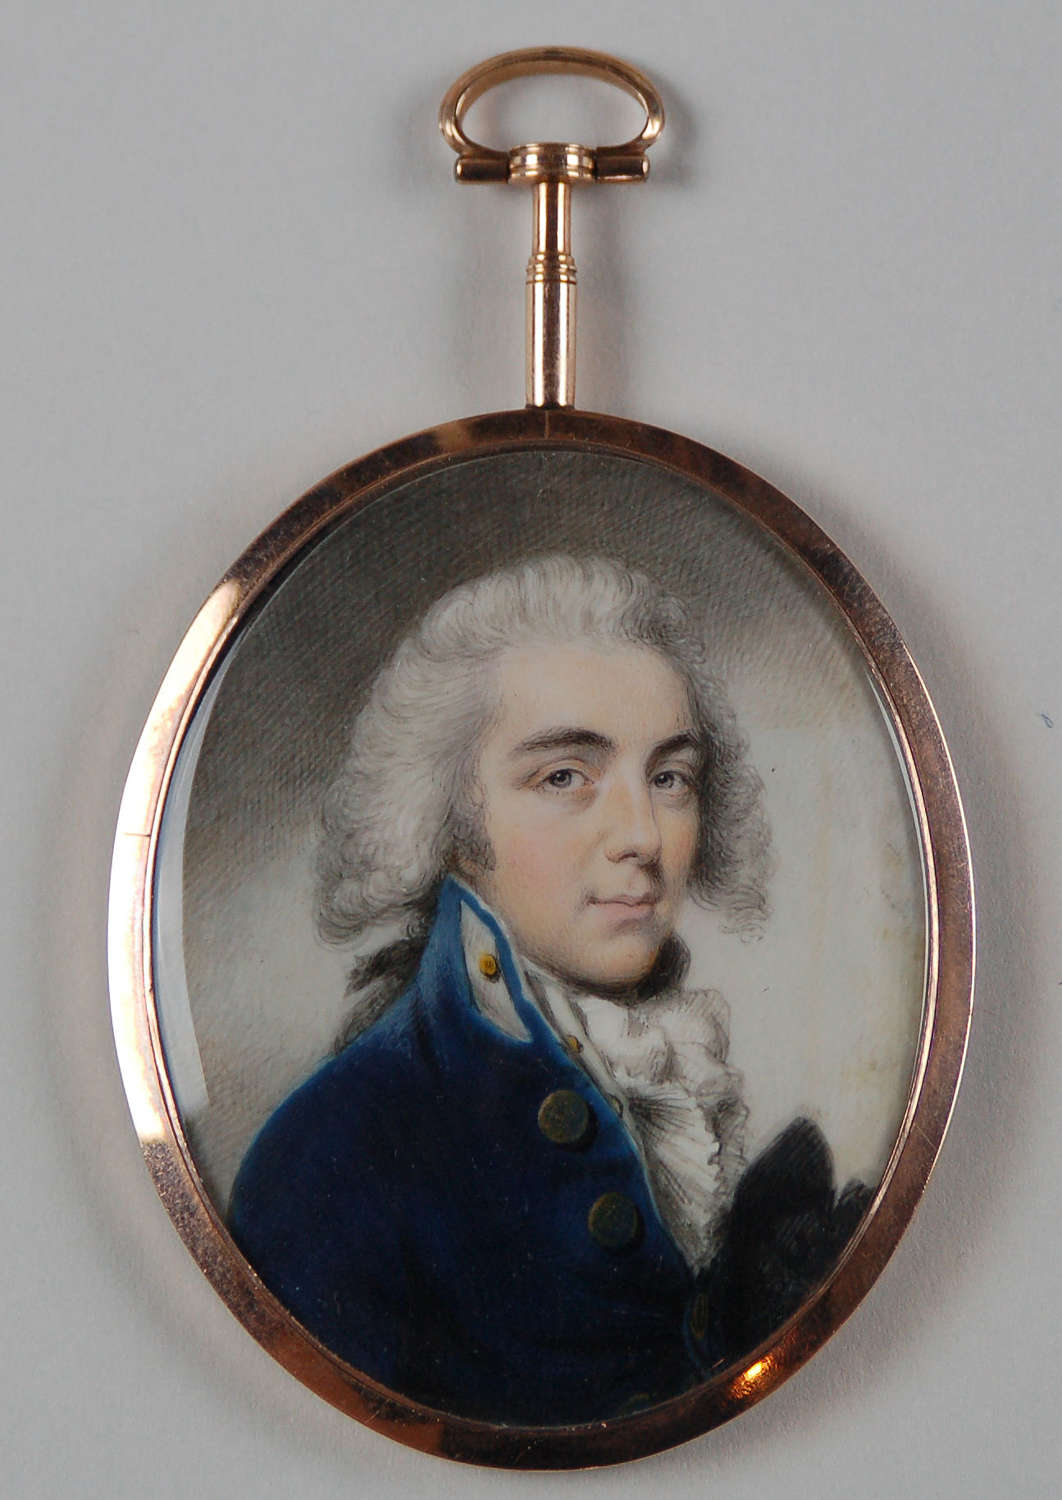 Miniature of naval officer by P Jean C1790